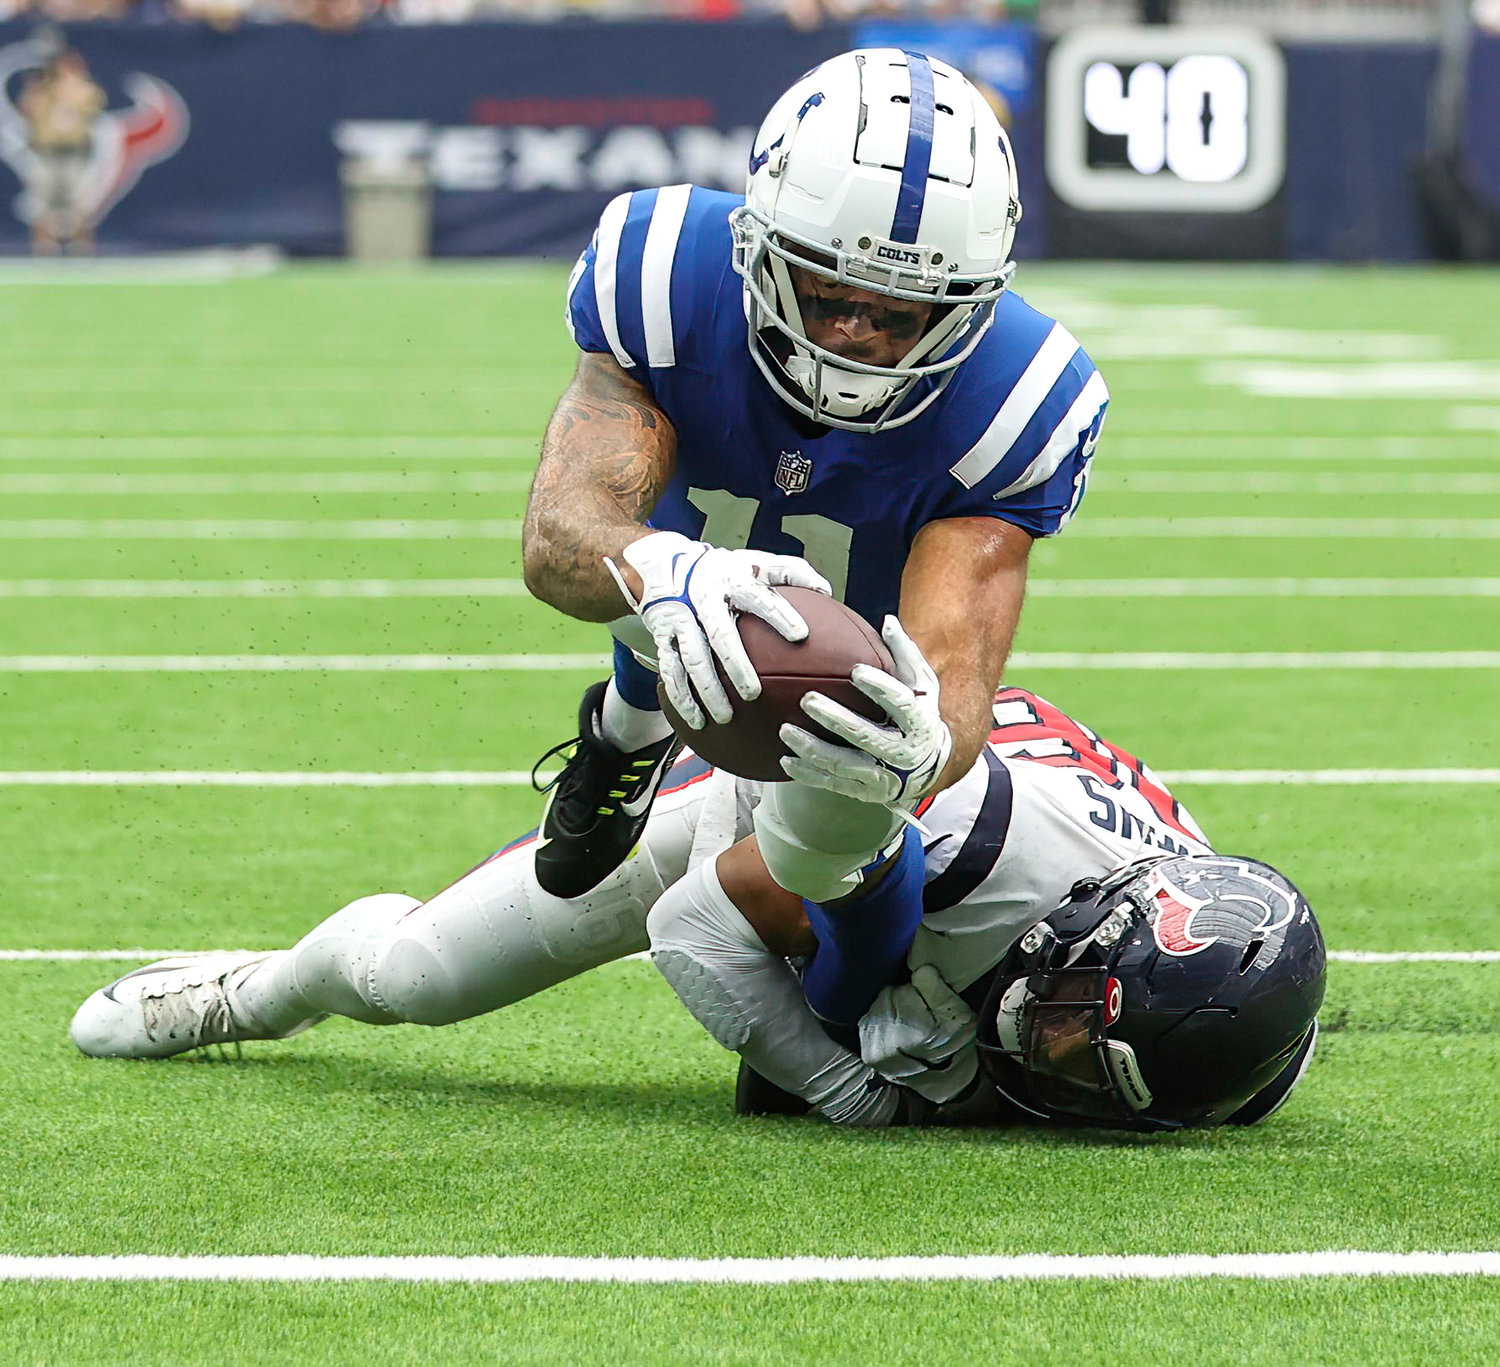 Indianapolis Colts wide receiver Michael Pittman Jr. (11) dives across the goal line to score the game-tying touchdown to bring the Colts back from being down 20-3 in an NFL game between the Texans and the Colts on September 11, 2022 in Houston. The game ended in a 20-20 tie after a scoreless overtime period.